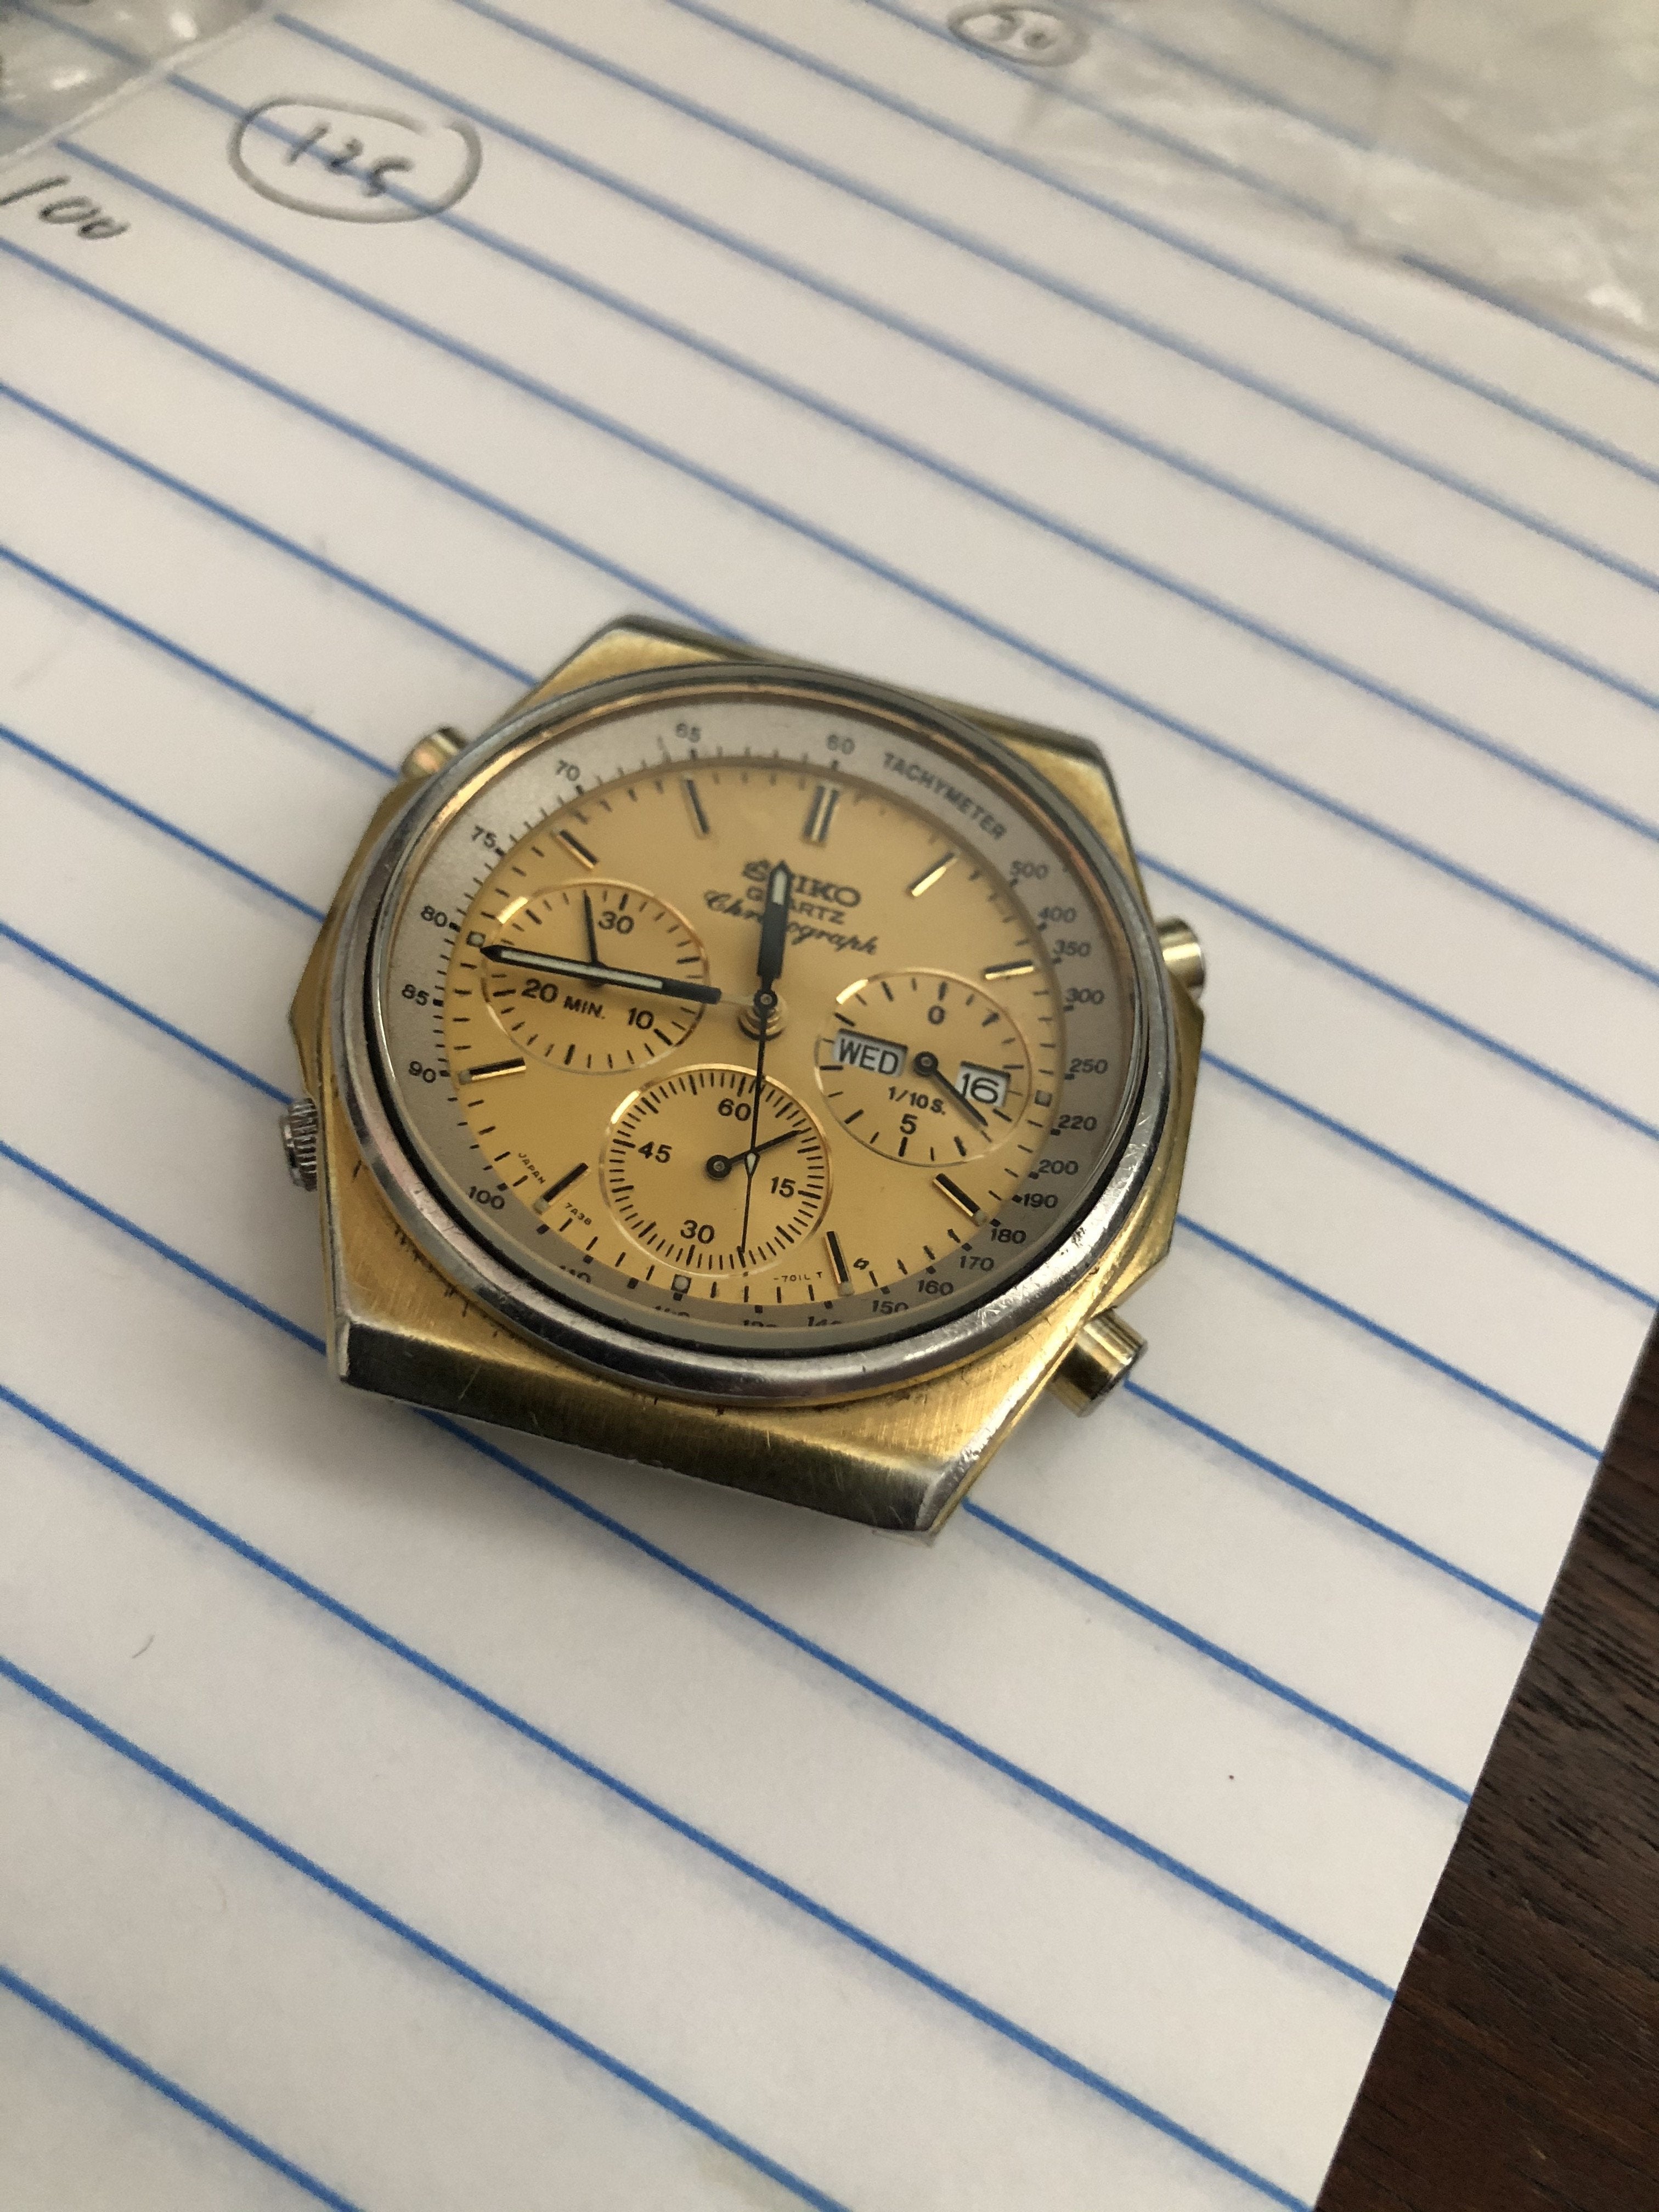 A little help with a Seiko 7A38-7000 (please & thank you) | The Watch Site